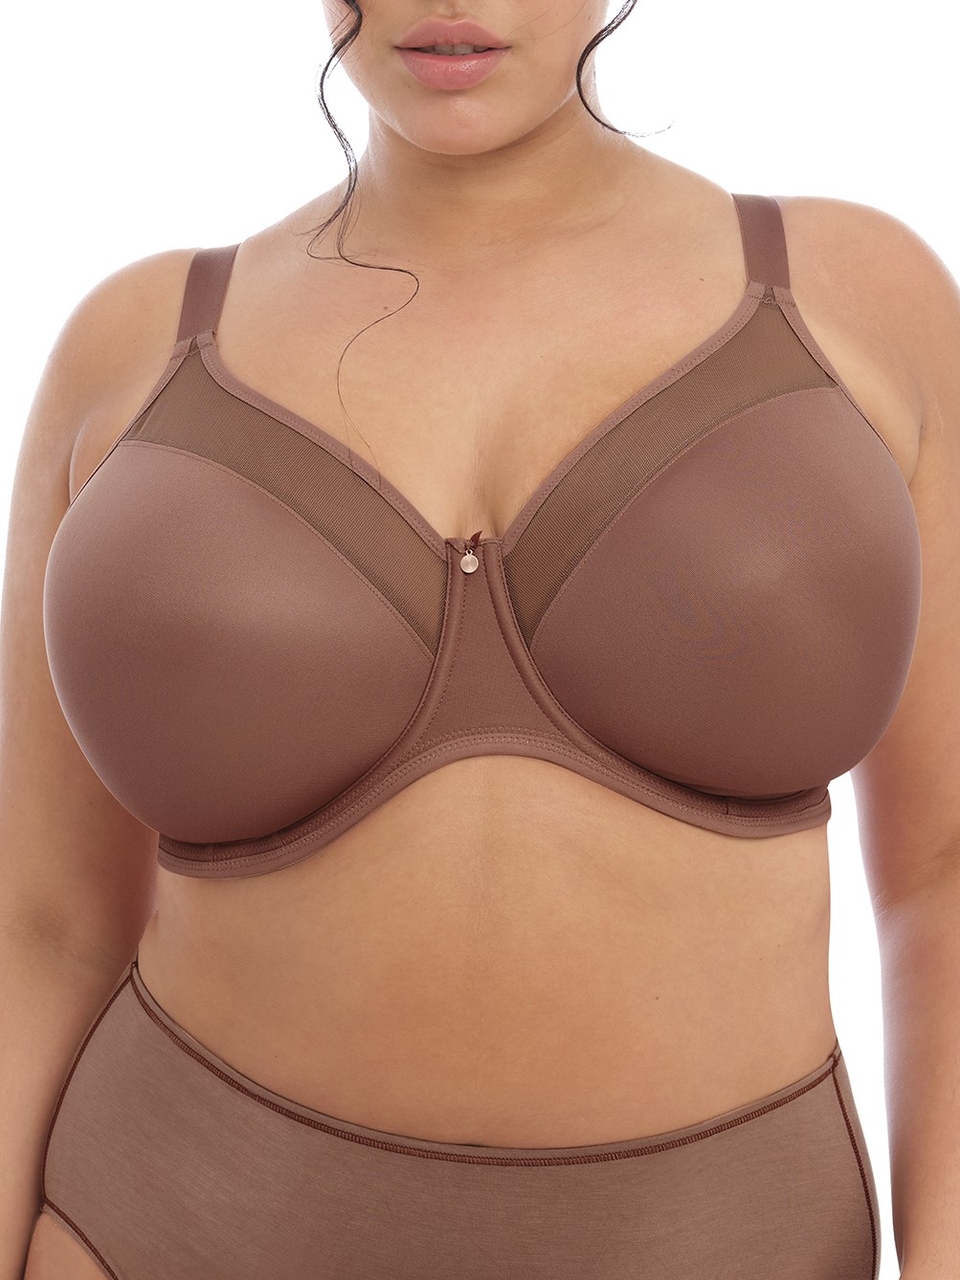 https://www.alamodeintimates.com/images/products/6360/ELO4301_clove_front_lg.jpg